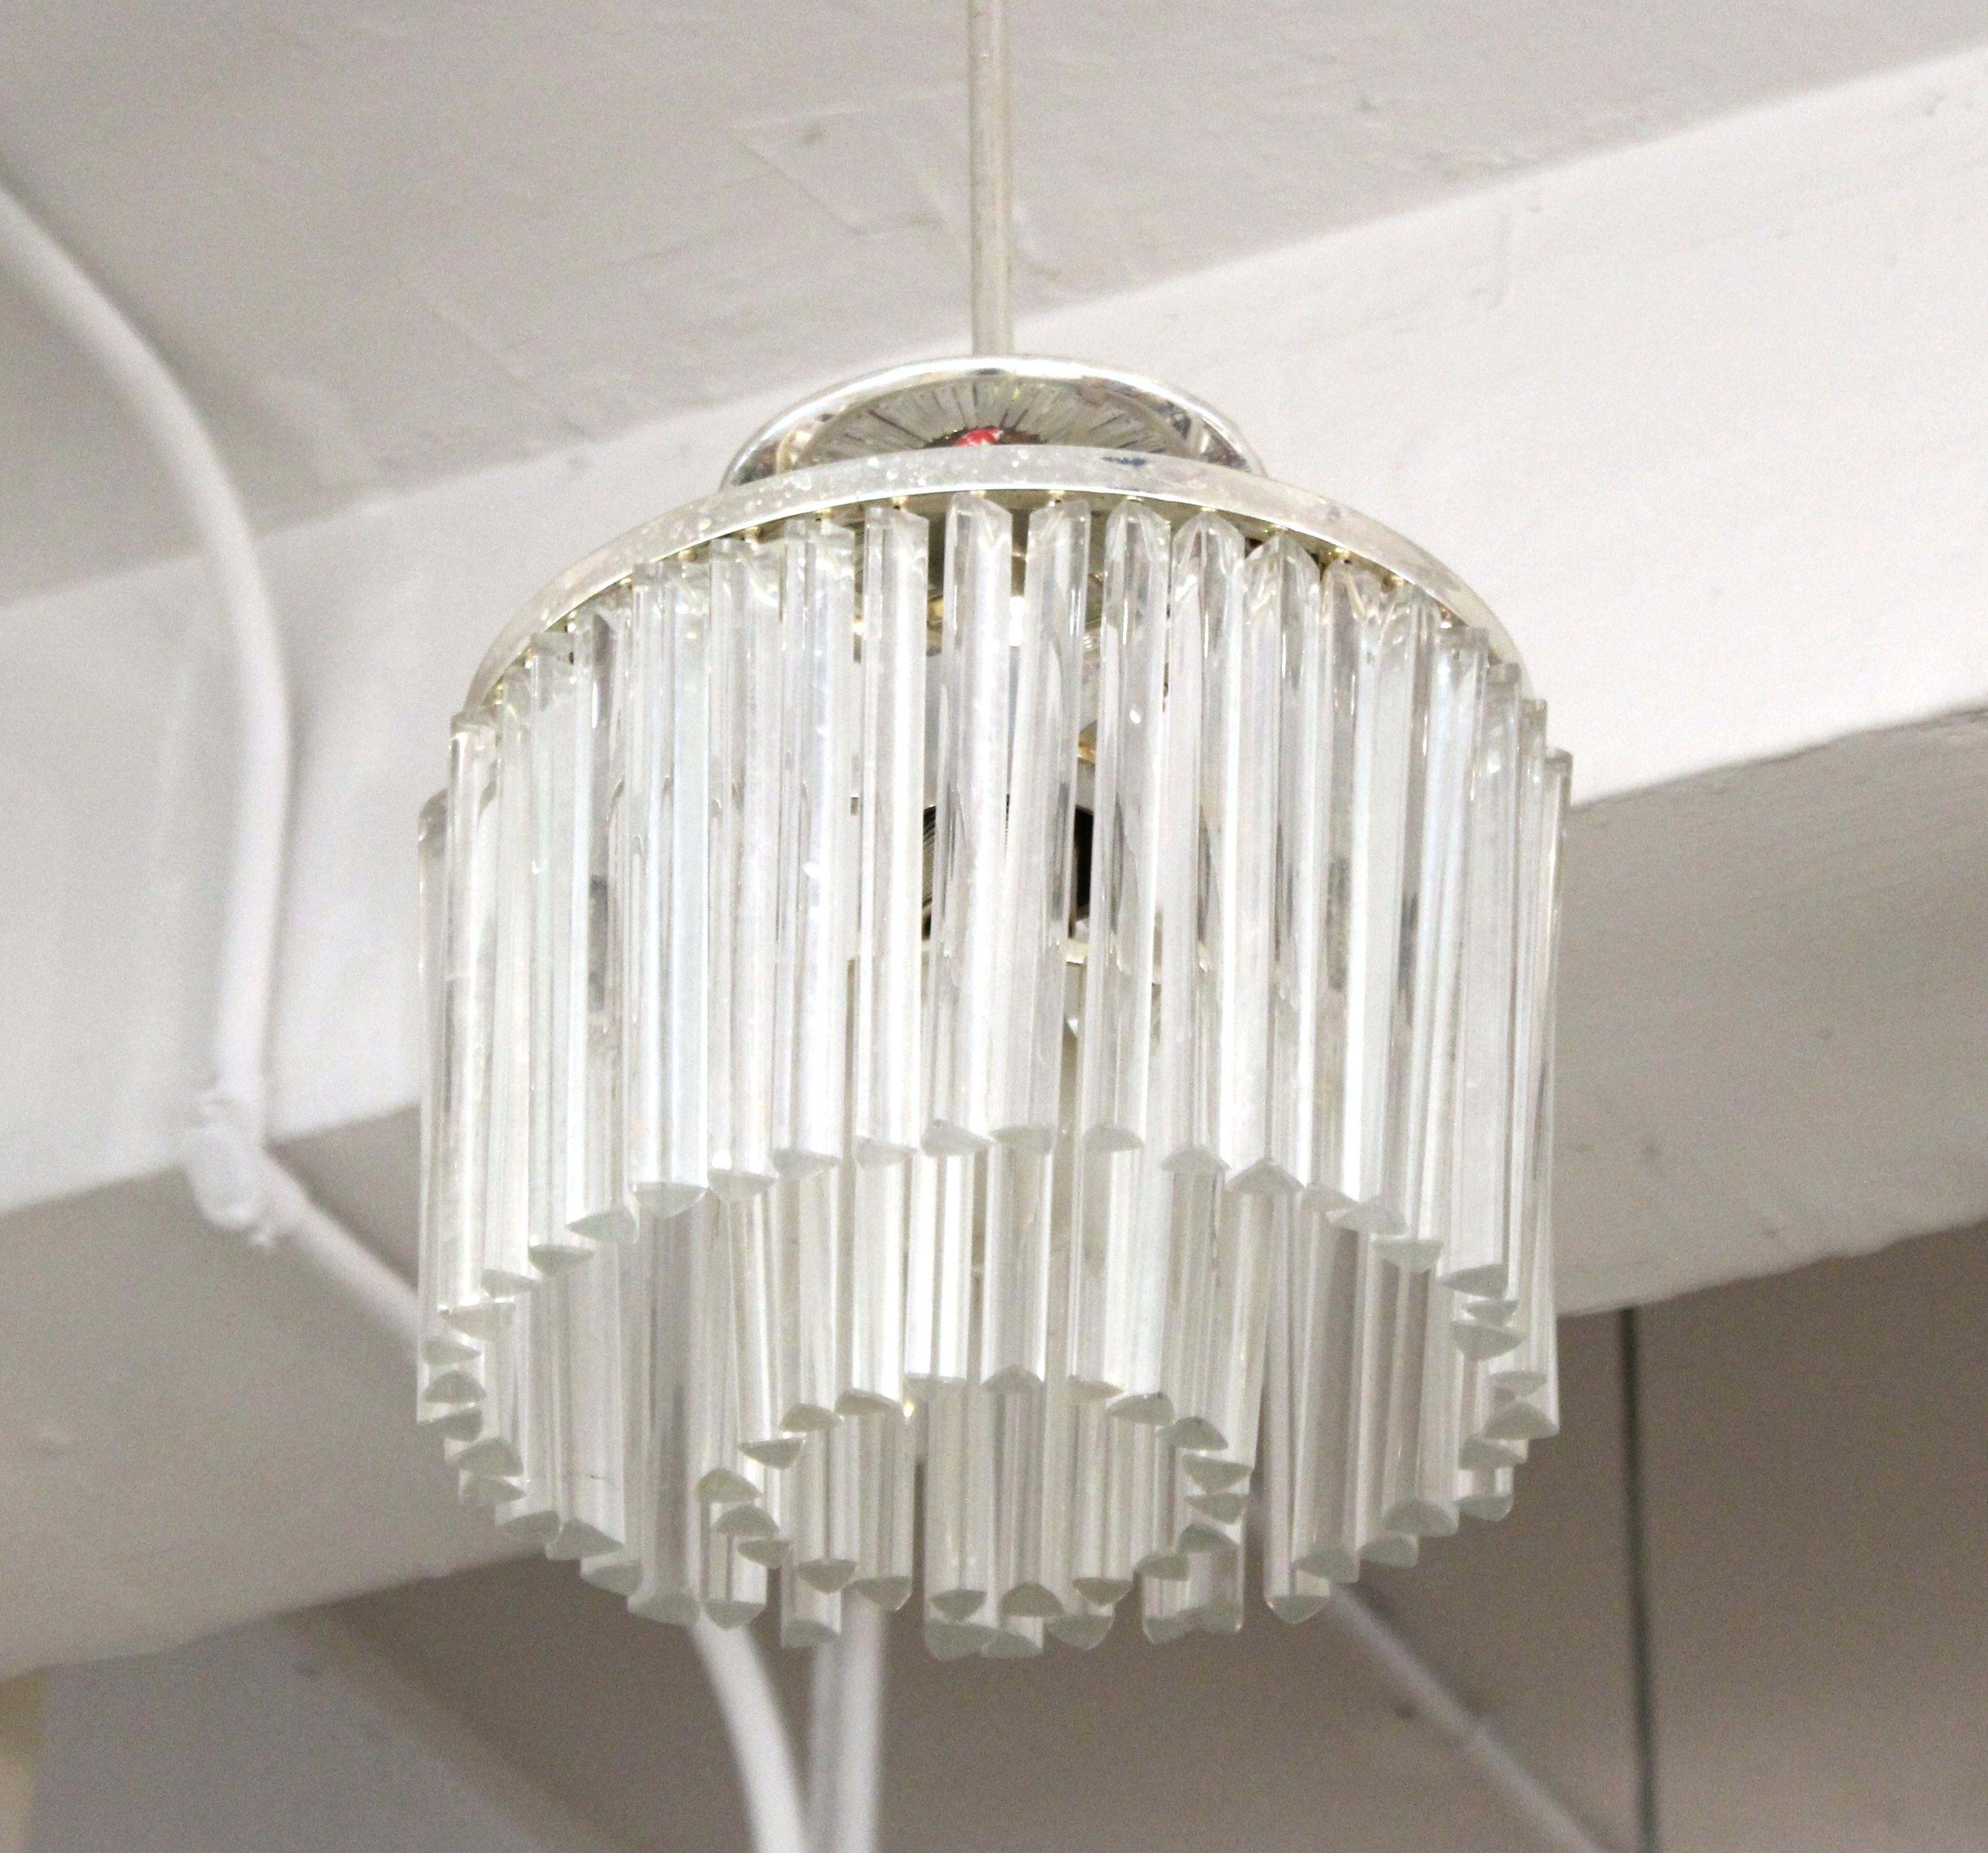 Italian Mid-Century Modern diminutive glass pendant light made in the style of Venini. The piece has two concentric circles of glass rods. In great vintage condition with age-appropriate wear and use.

Dealer: R320BG - S138XX